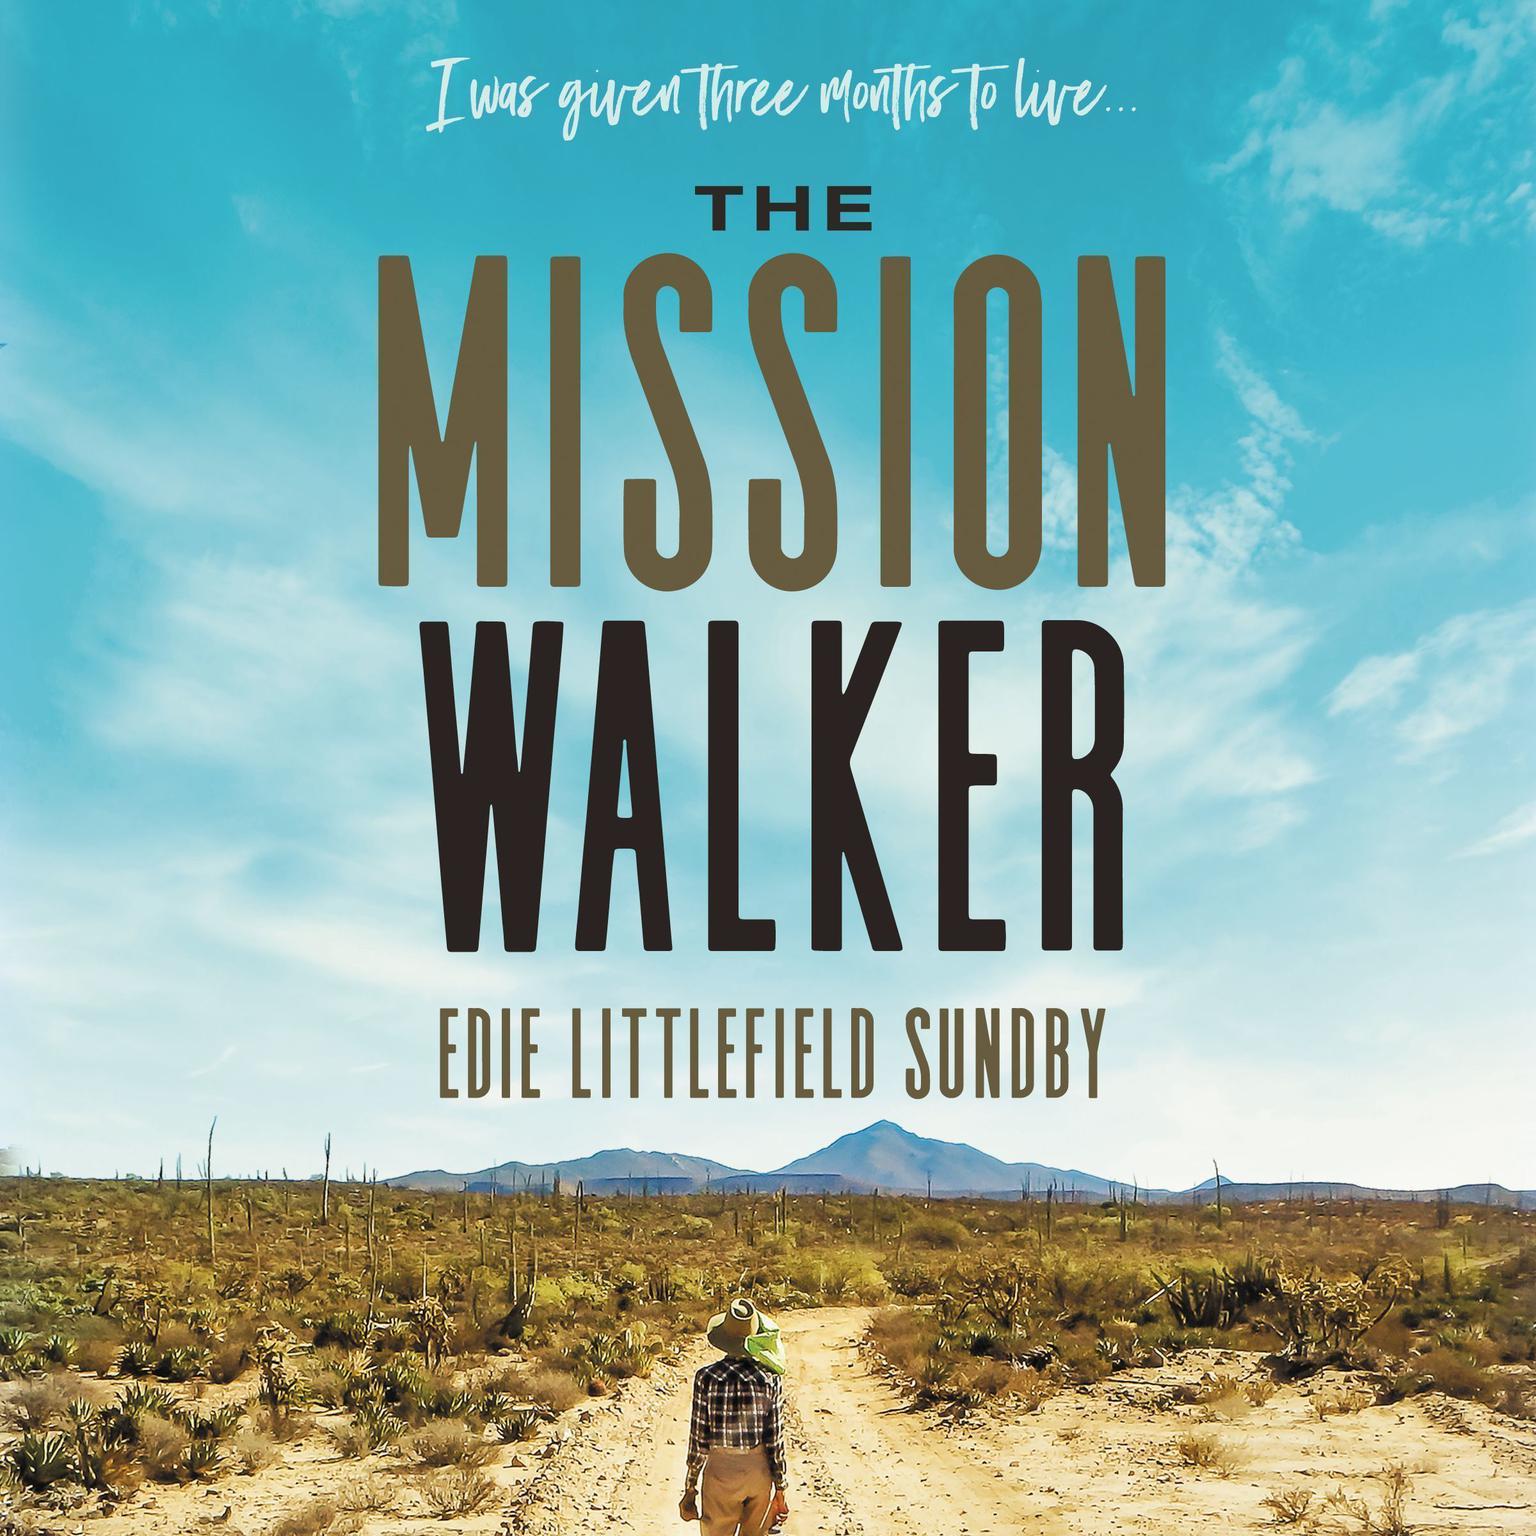 The Mission Walker: I was given three months to live... Audiobook, by Edie Littlefield Sundby